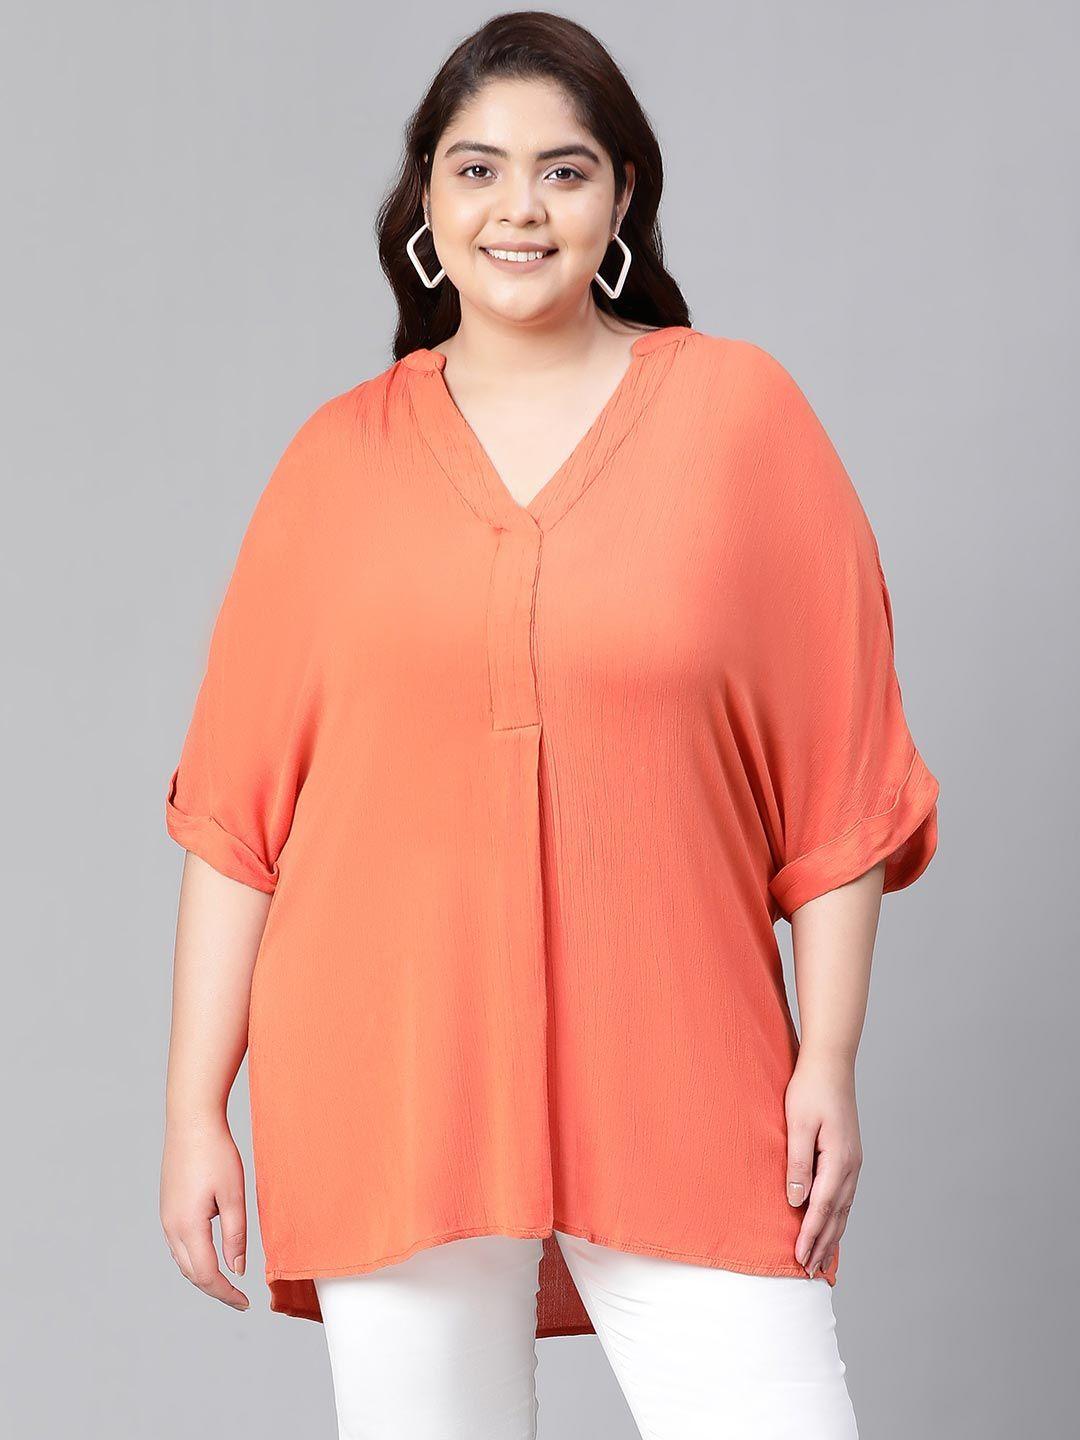 oxolloxo plus size extended sleeves top